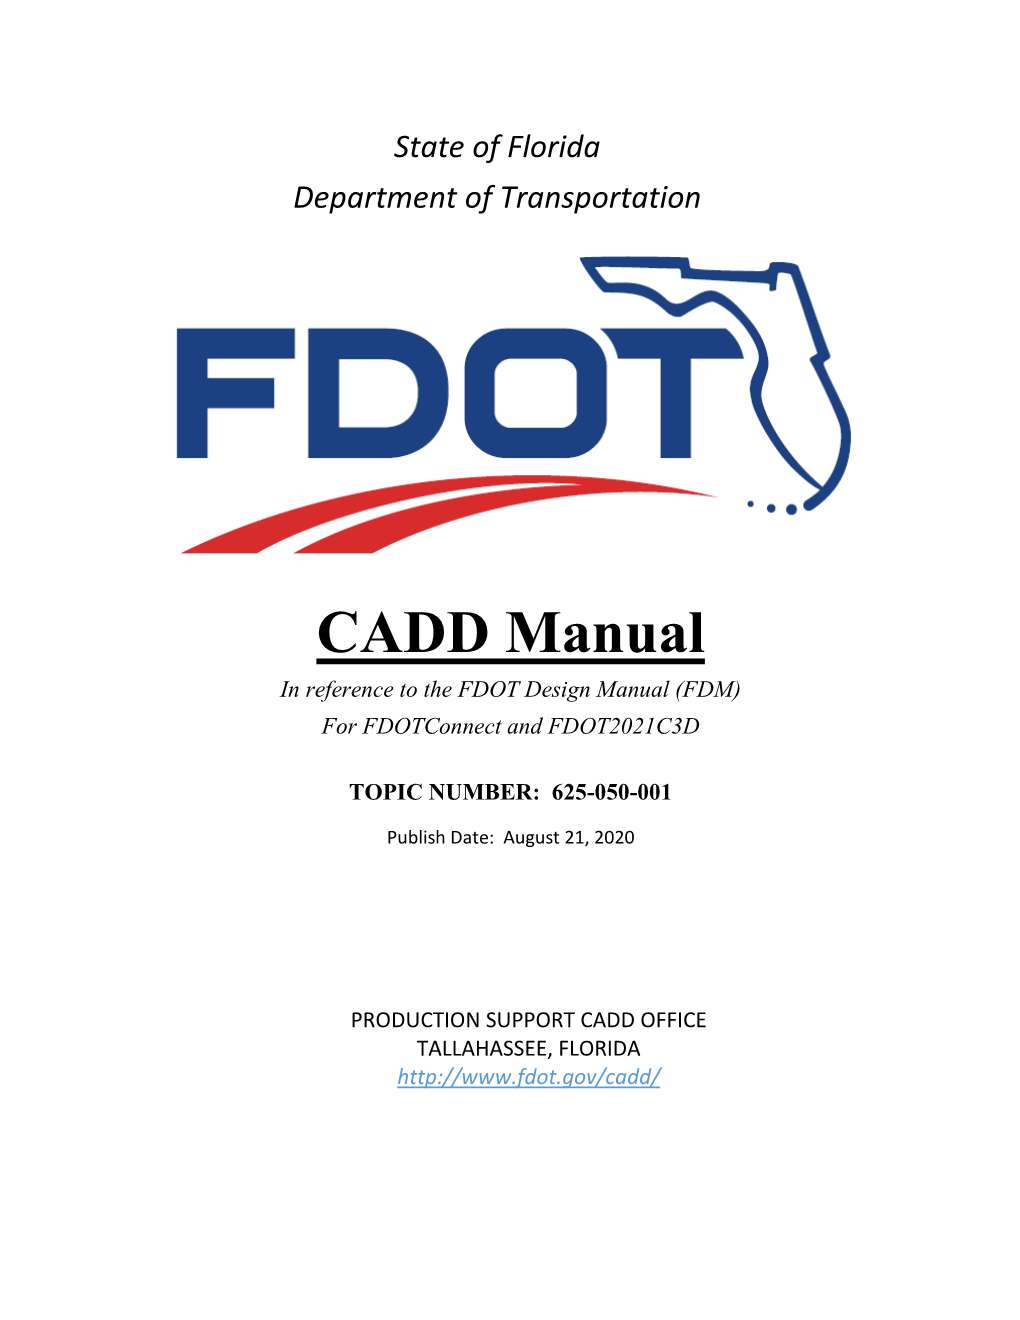 CADD Manual in Reference to the FDOT Design Manual (FDM) for Fdotconnect and FDOT2021C3D